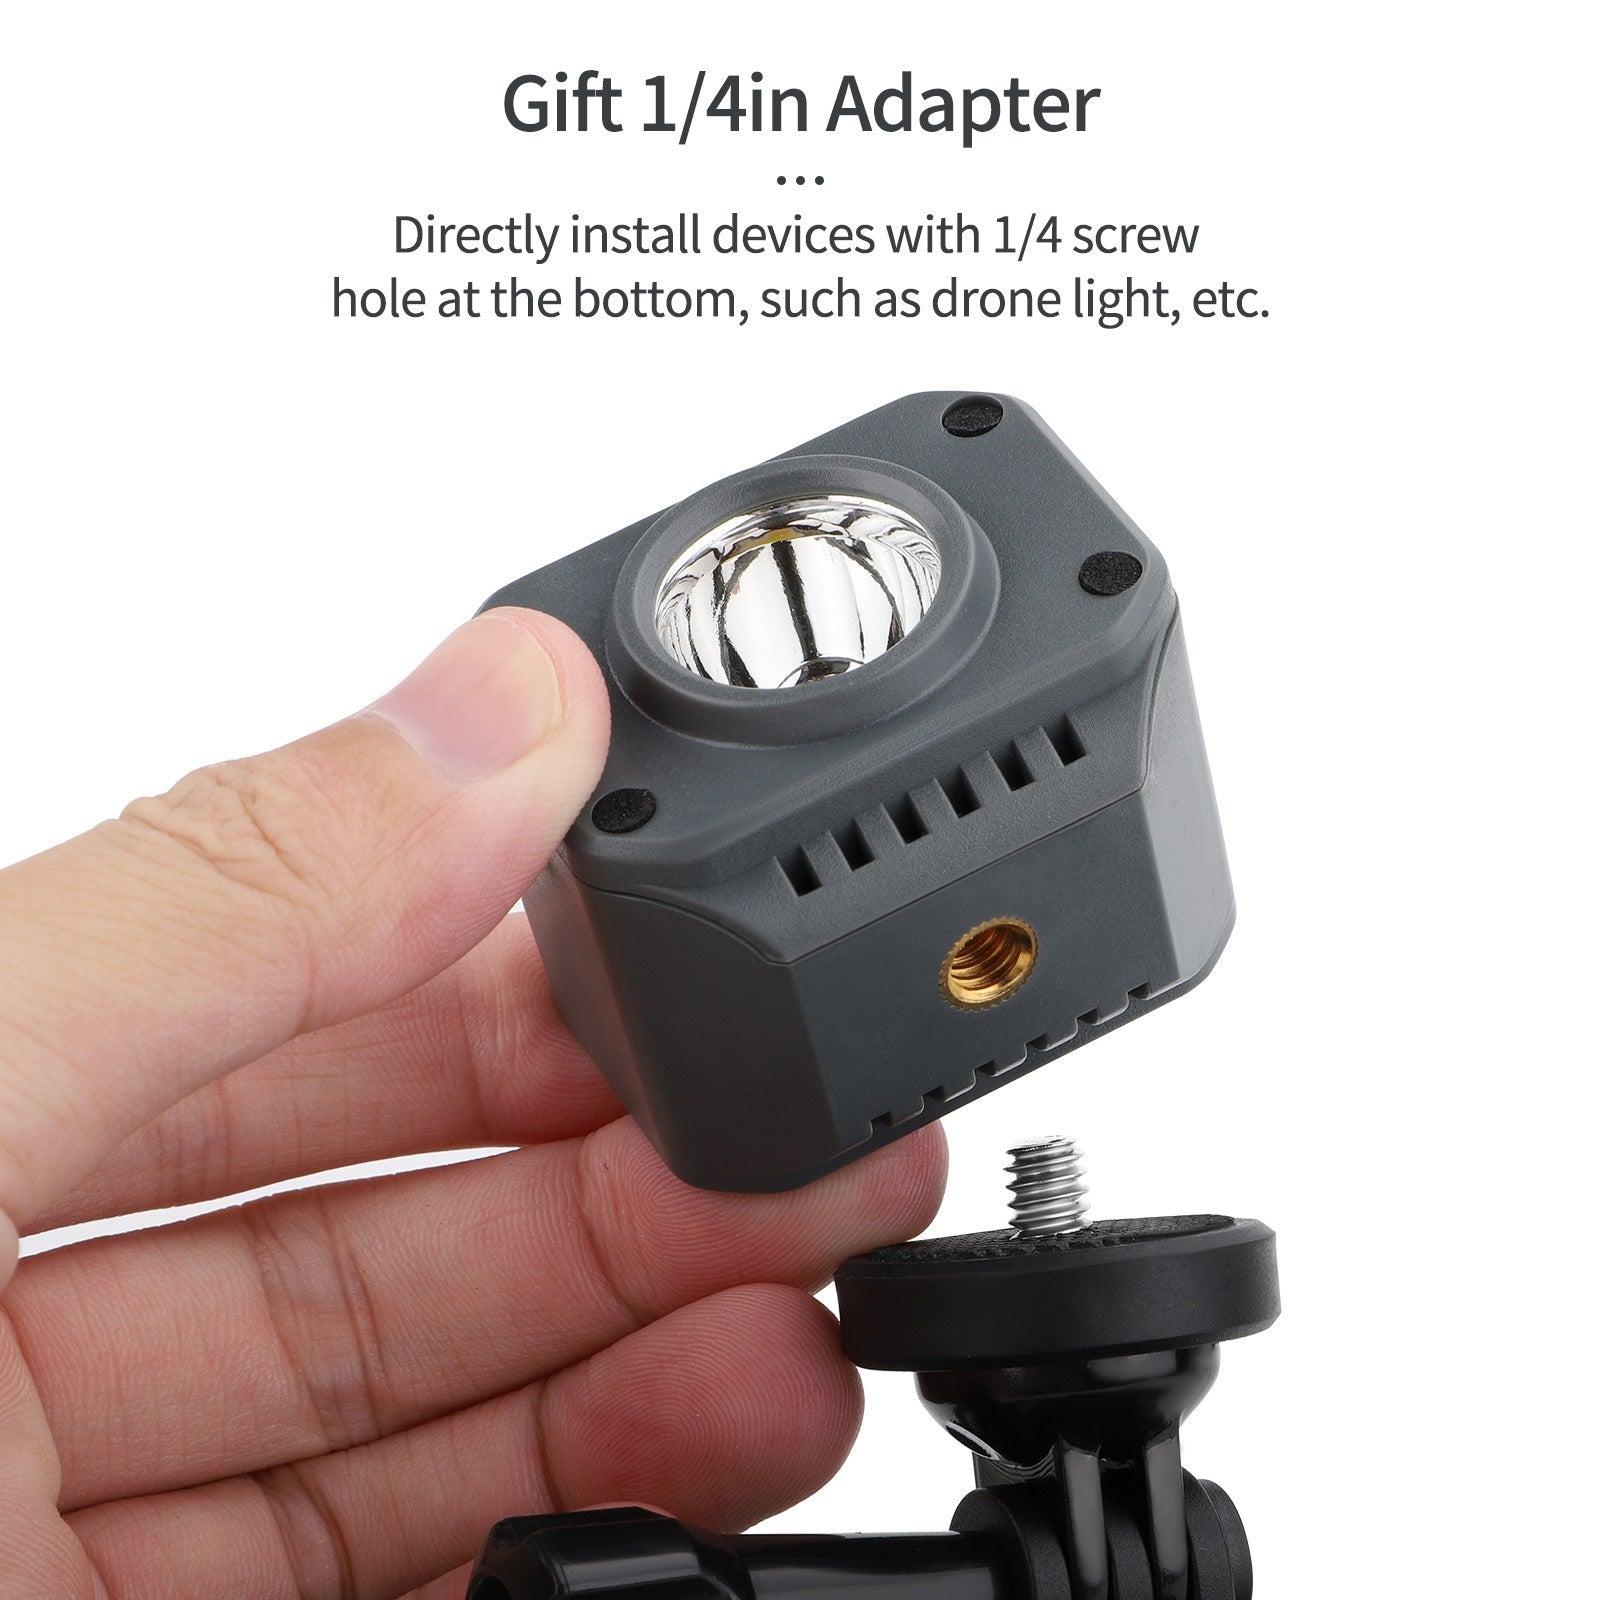 SUNNYLIFE AT-GZ512 Multifunctional Adapter Mount for DJI Avata External Extension Adapter with 1 / 4 Screw Connector